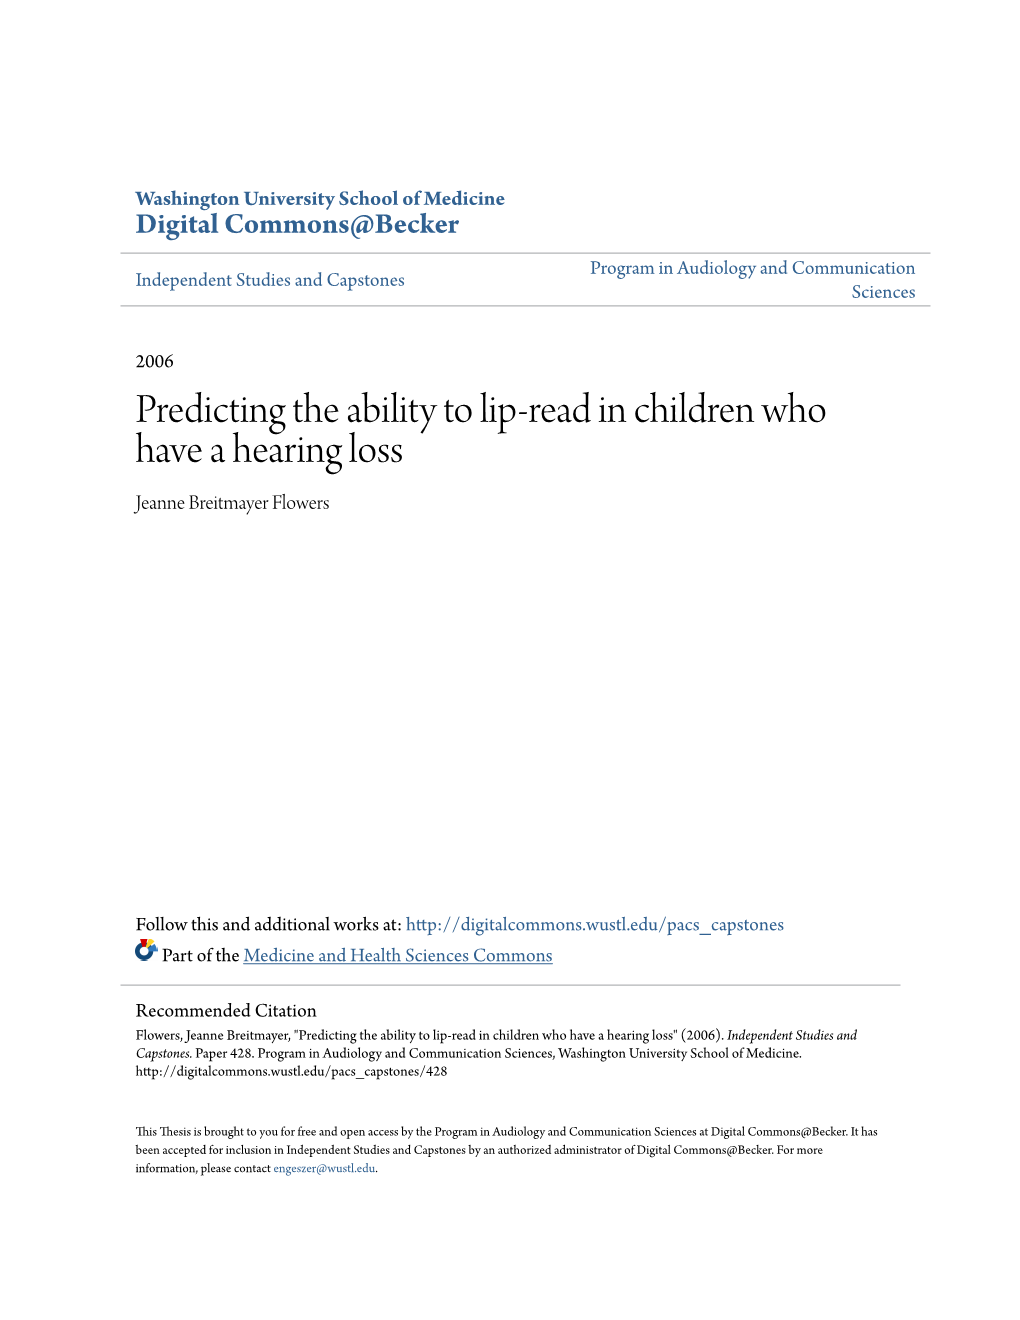 Predicting the Ability to Lip-Read in Children Who Have a Hearing Loss Jeanne Breitmayer Flowers